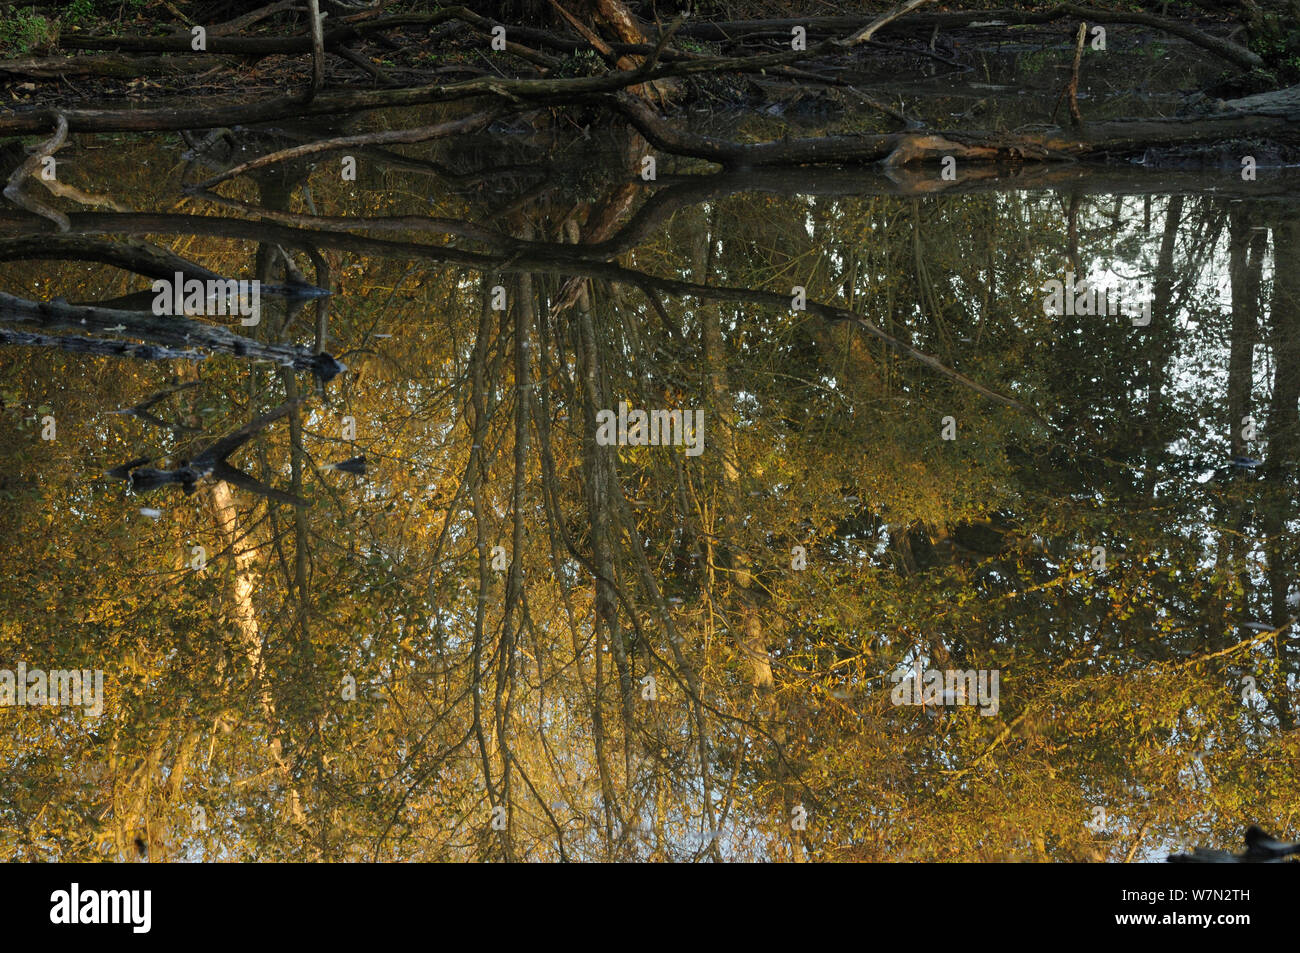 Reflections of Grey willow (Salix cinerea) and Alder (Alnus glutinosa) trees, with exposed dead wood in a glacial kettle hole pond, Herefordshire, England, UK, Europe, November Stock Photo